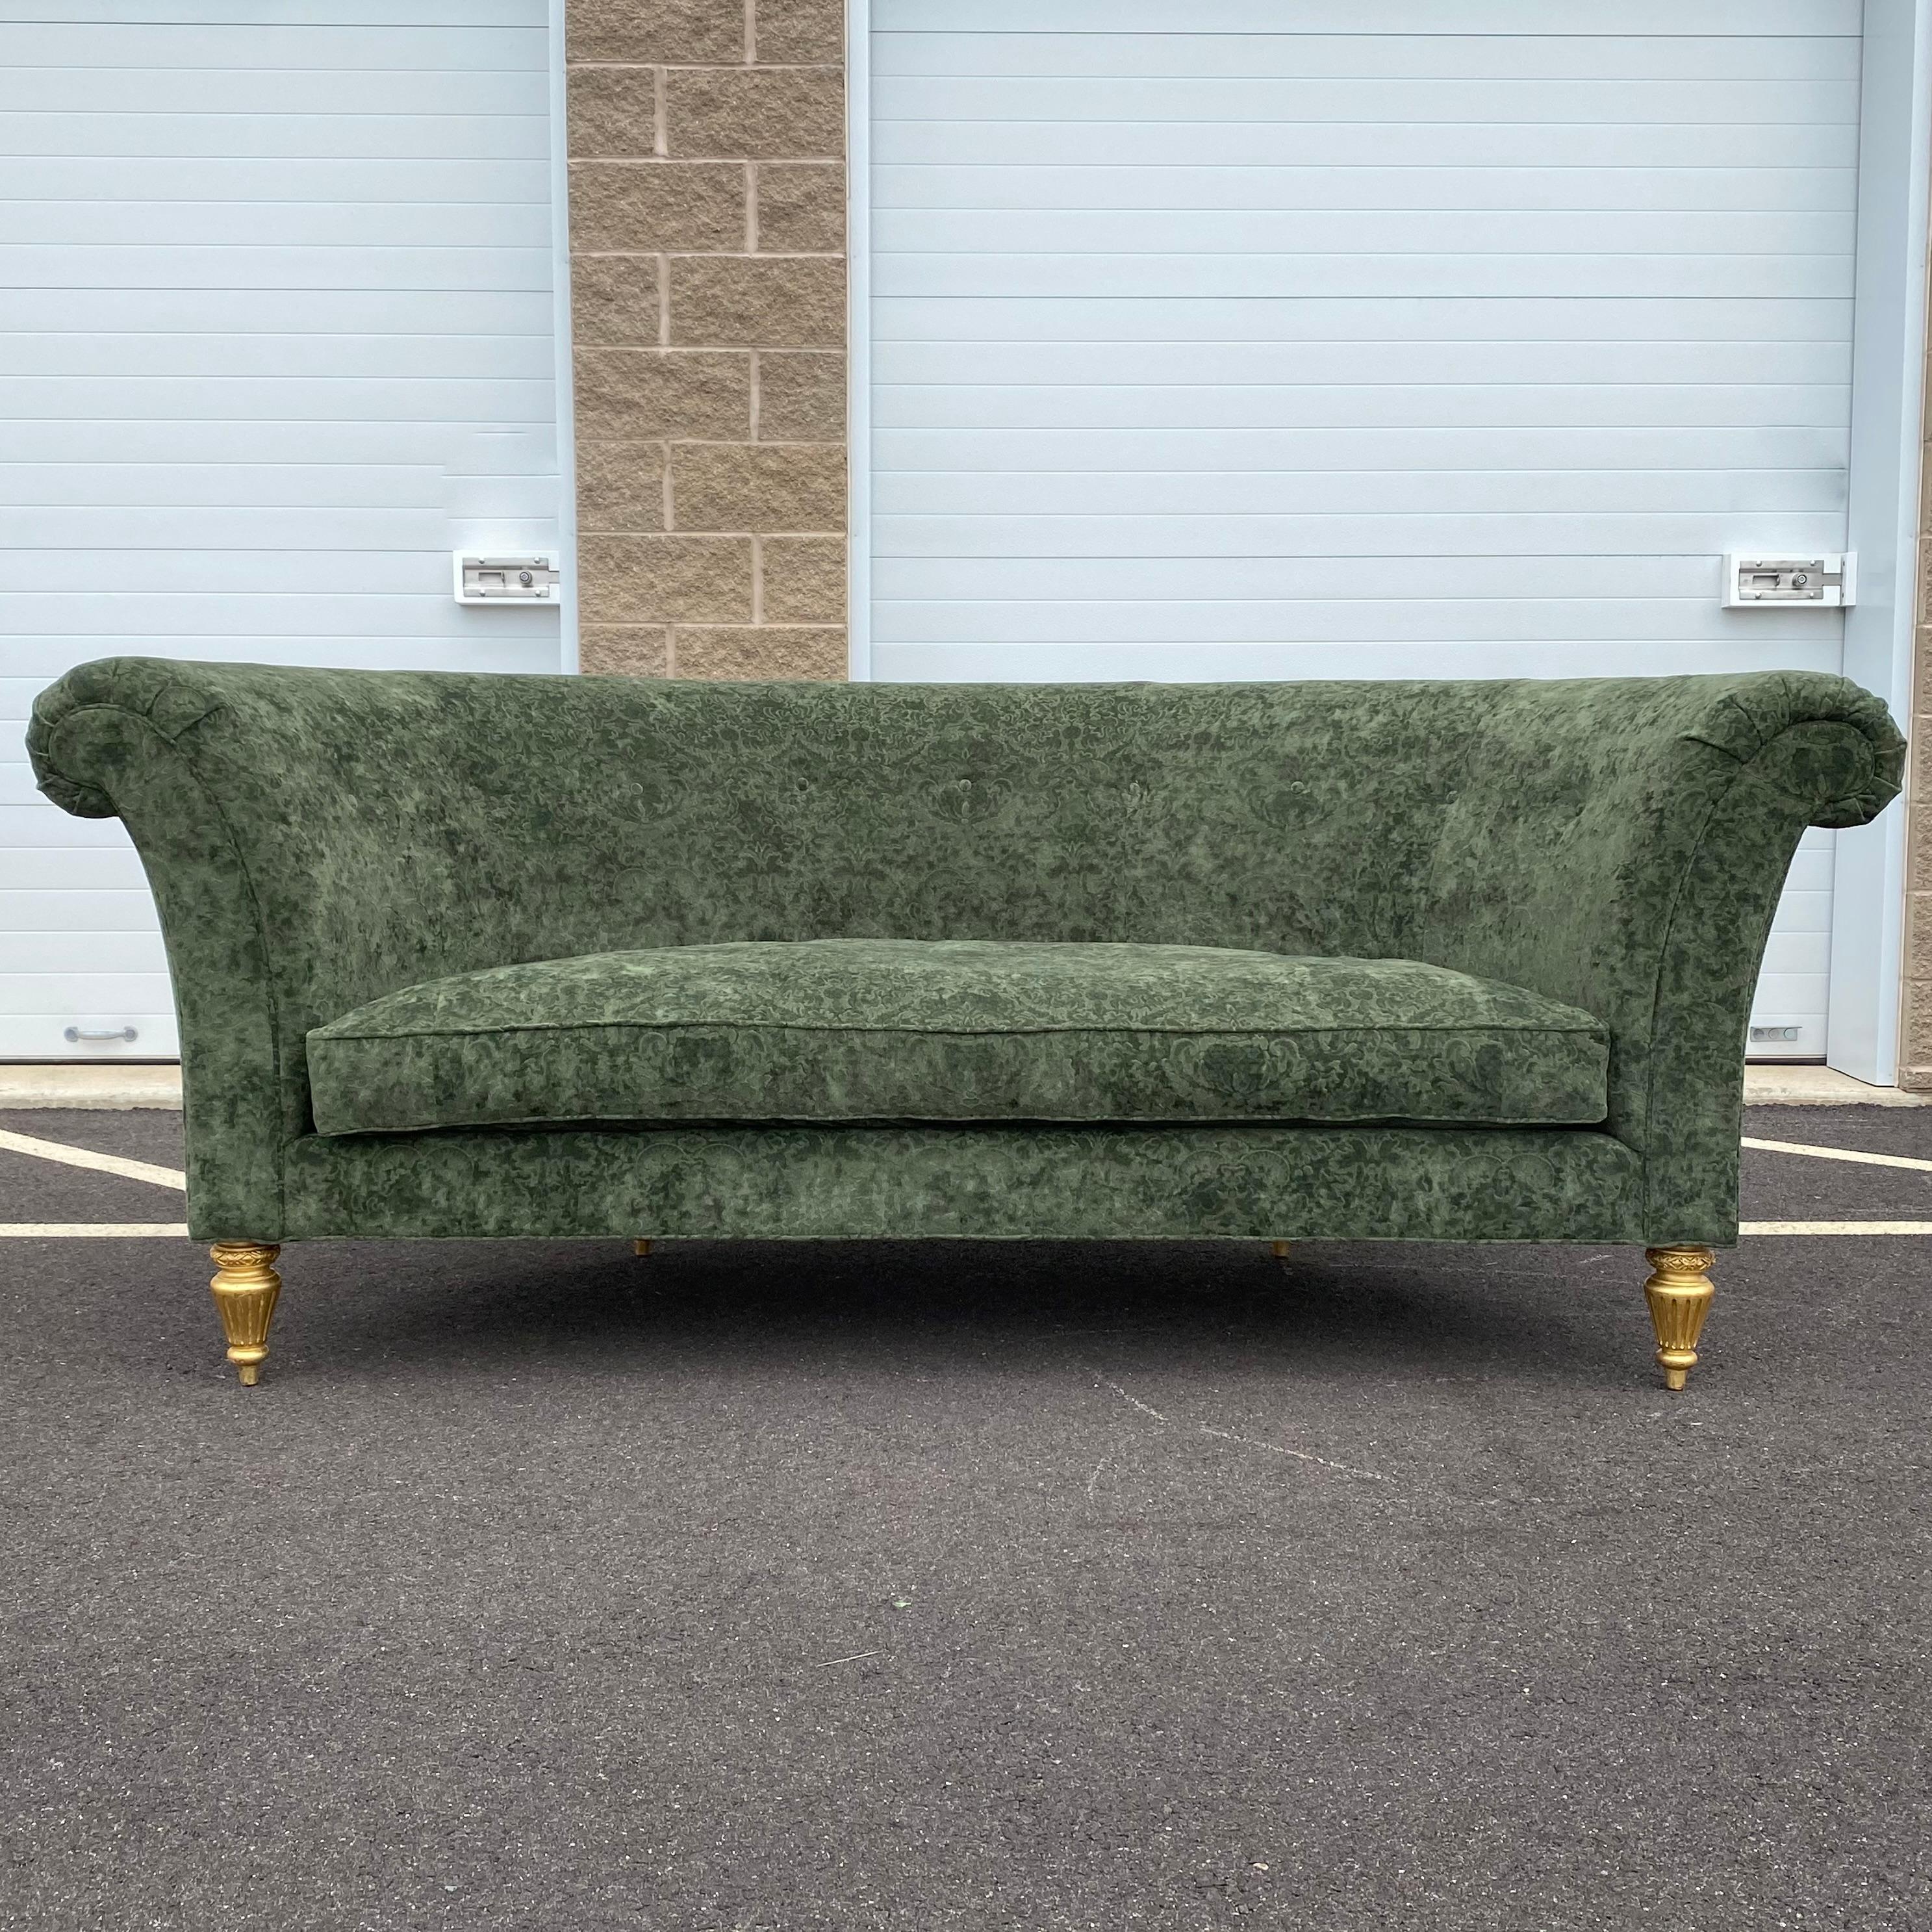 Henredon Schoonbeck Collection Green Damask Demilune Sofa With Six Throw Pillows In Good Condition For Sale In West Chester, PA